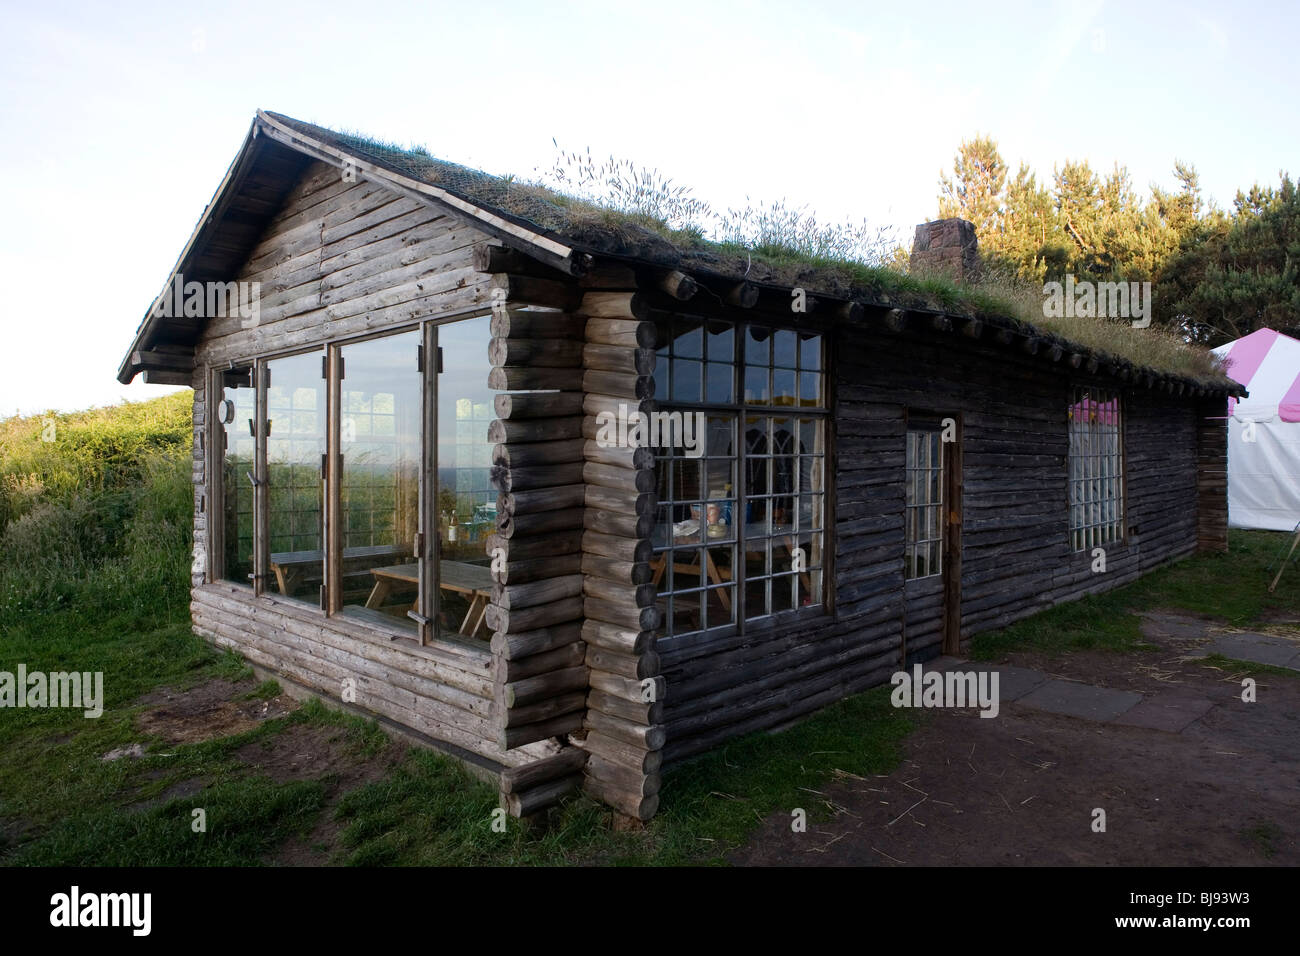 wooden country cottage with turfed roof and large windows, party tent in the background Stock Photo